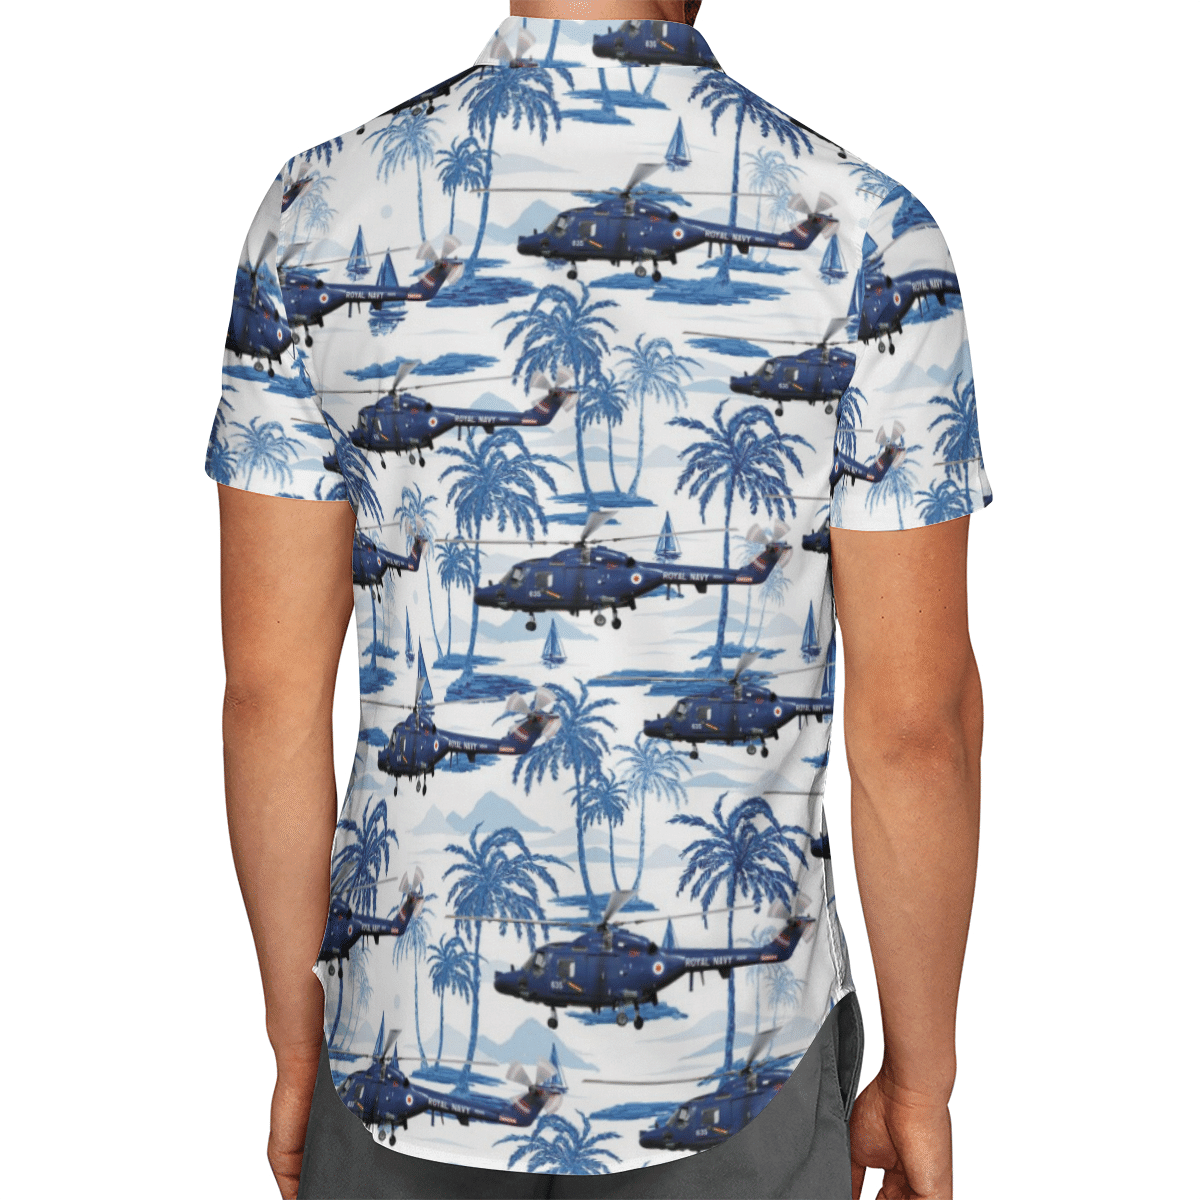 Going to the beach with a quality shirt 138